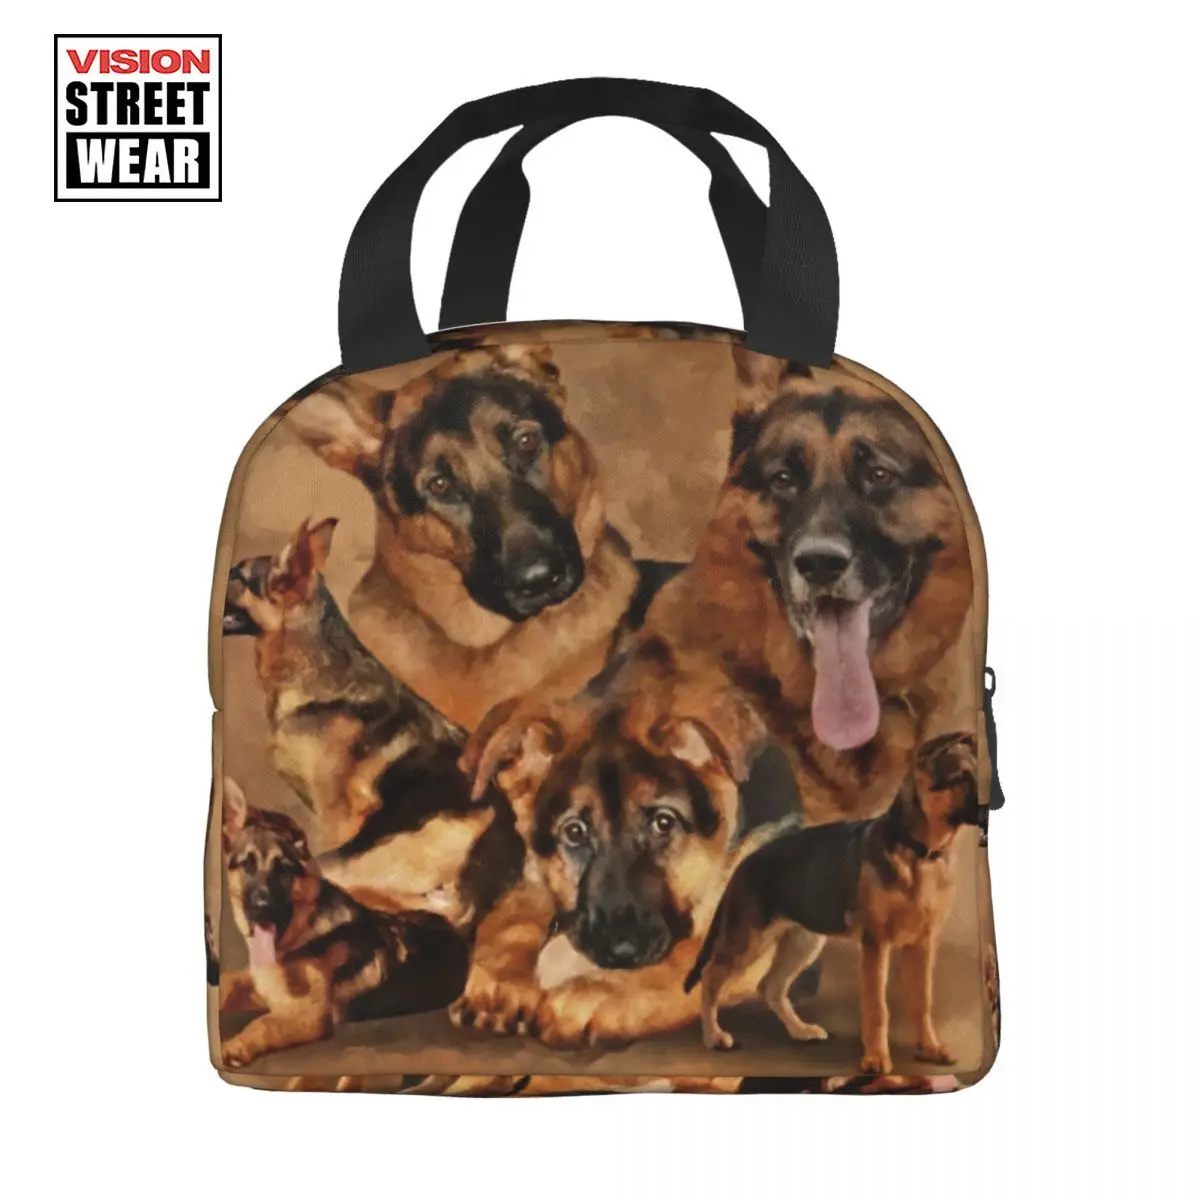 

Kawaii German Shepherd Dog Lunch Box For Women Pet Lover Owner Thermal Cooler Food Insulated Lunch Bag School Children Student